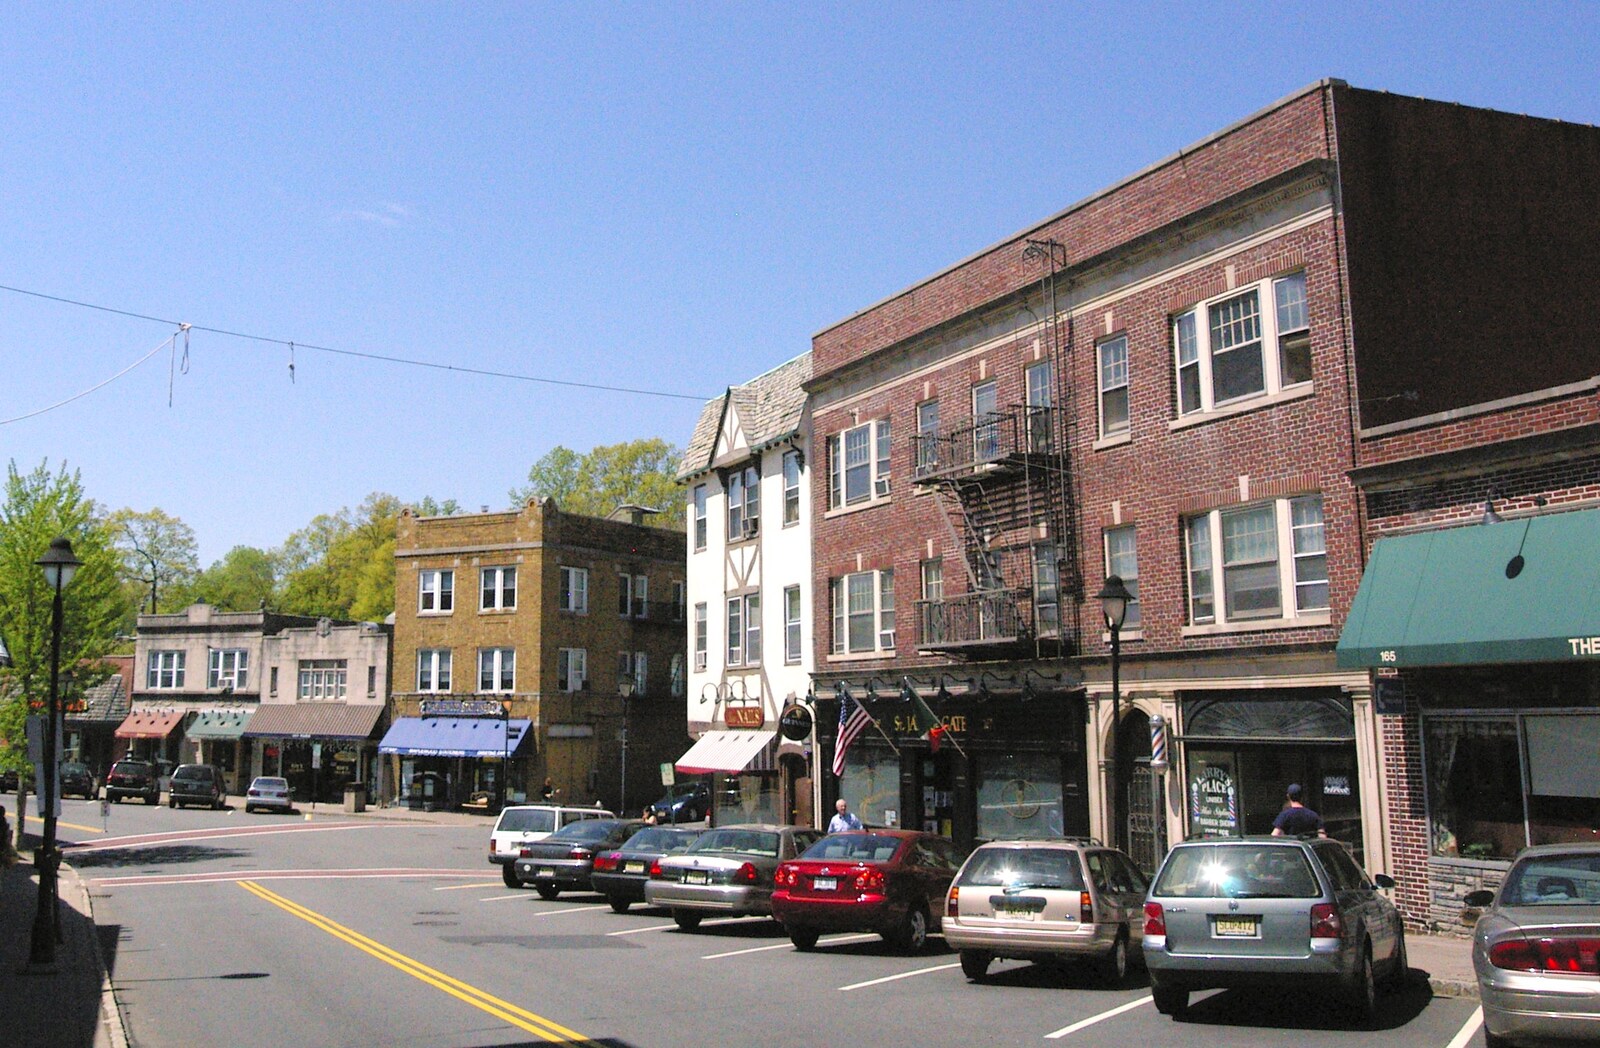 More Main Street from Maplewood and Little-League Baseball, New Jersey - 29th April 2006